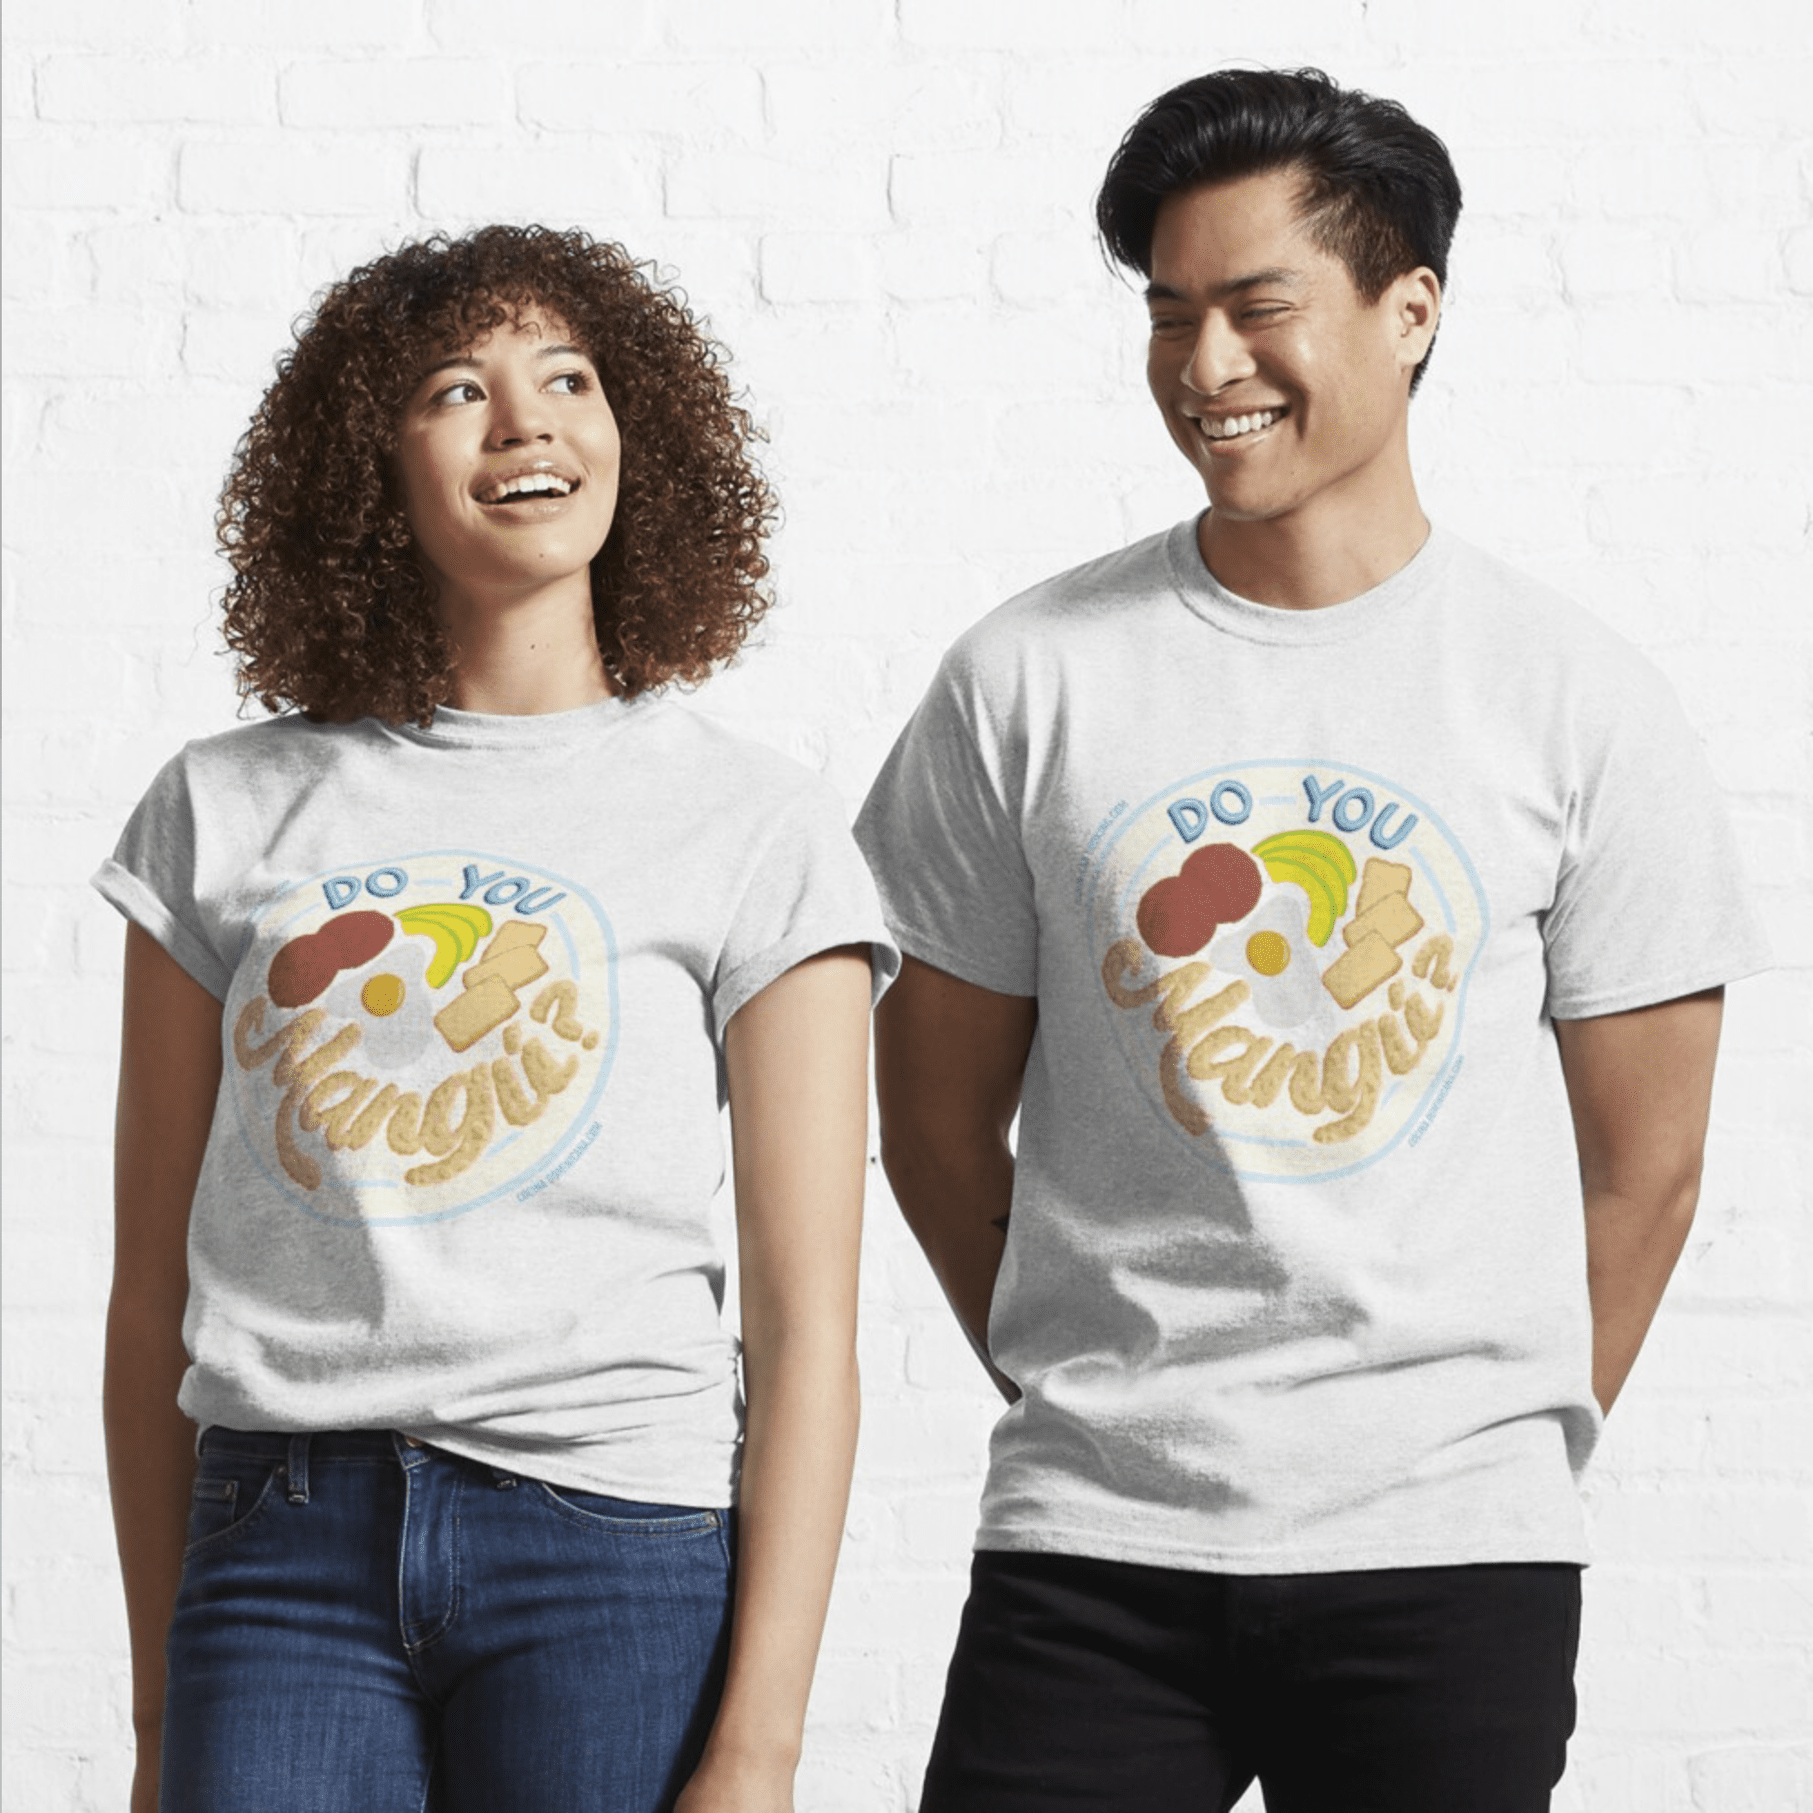 Man and woman with tees